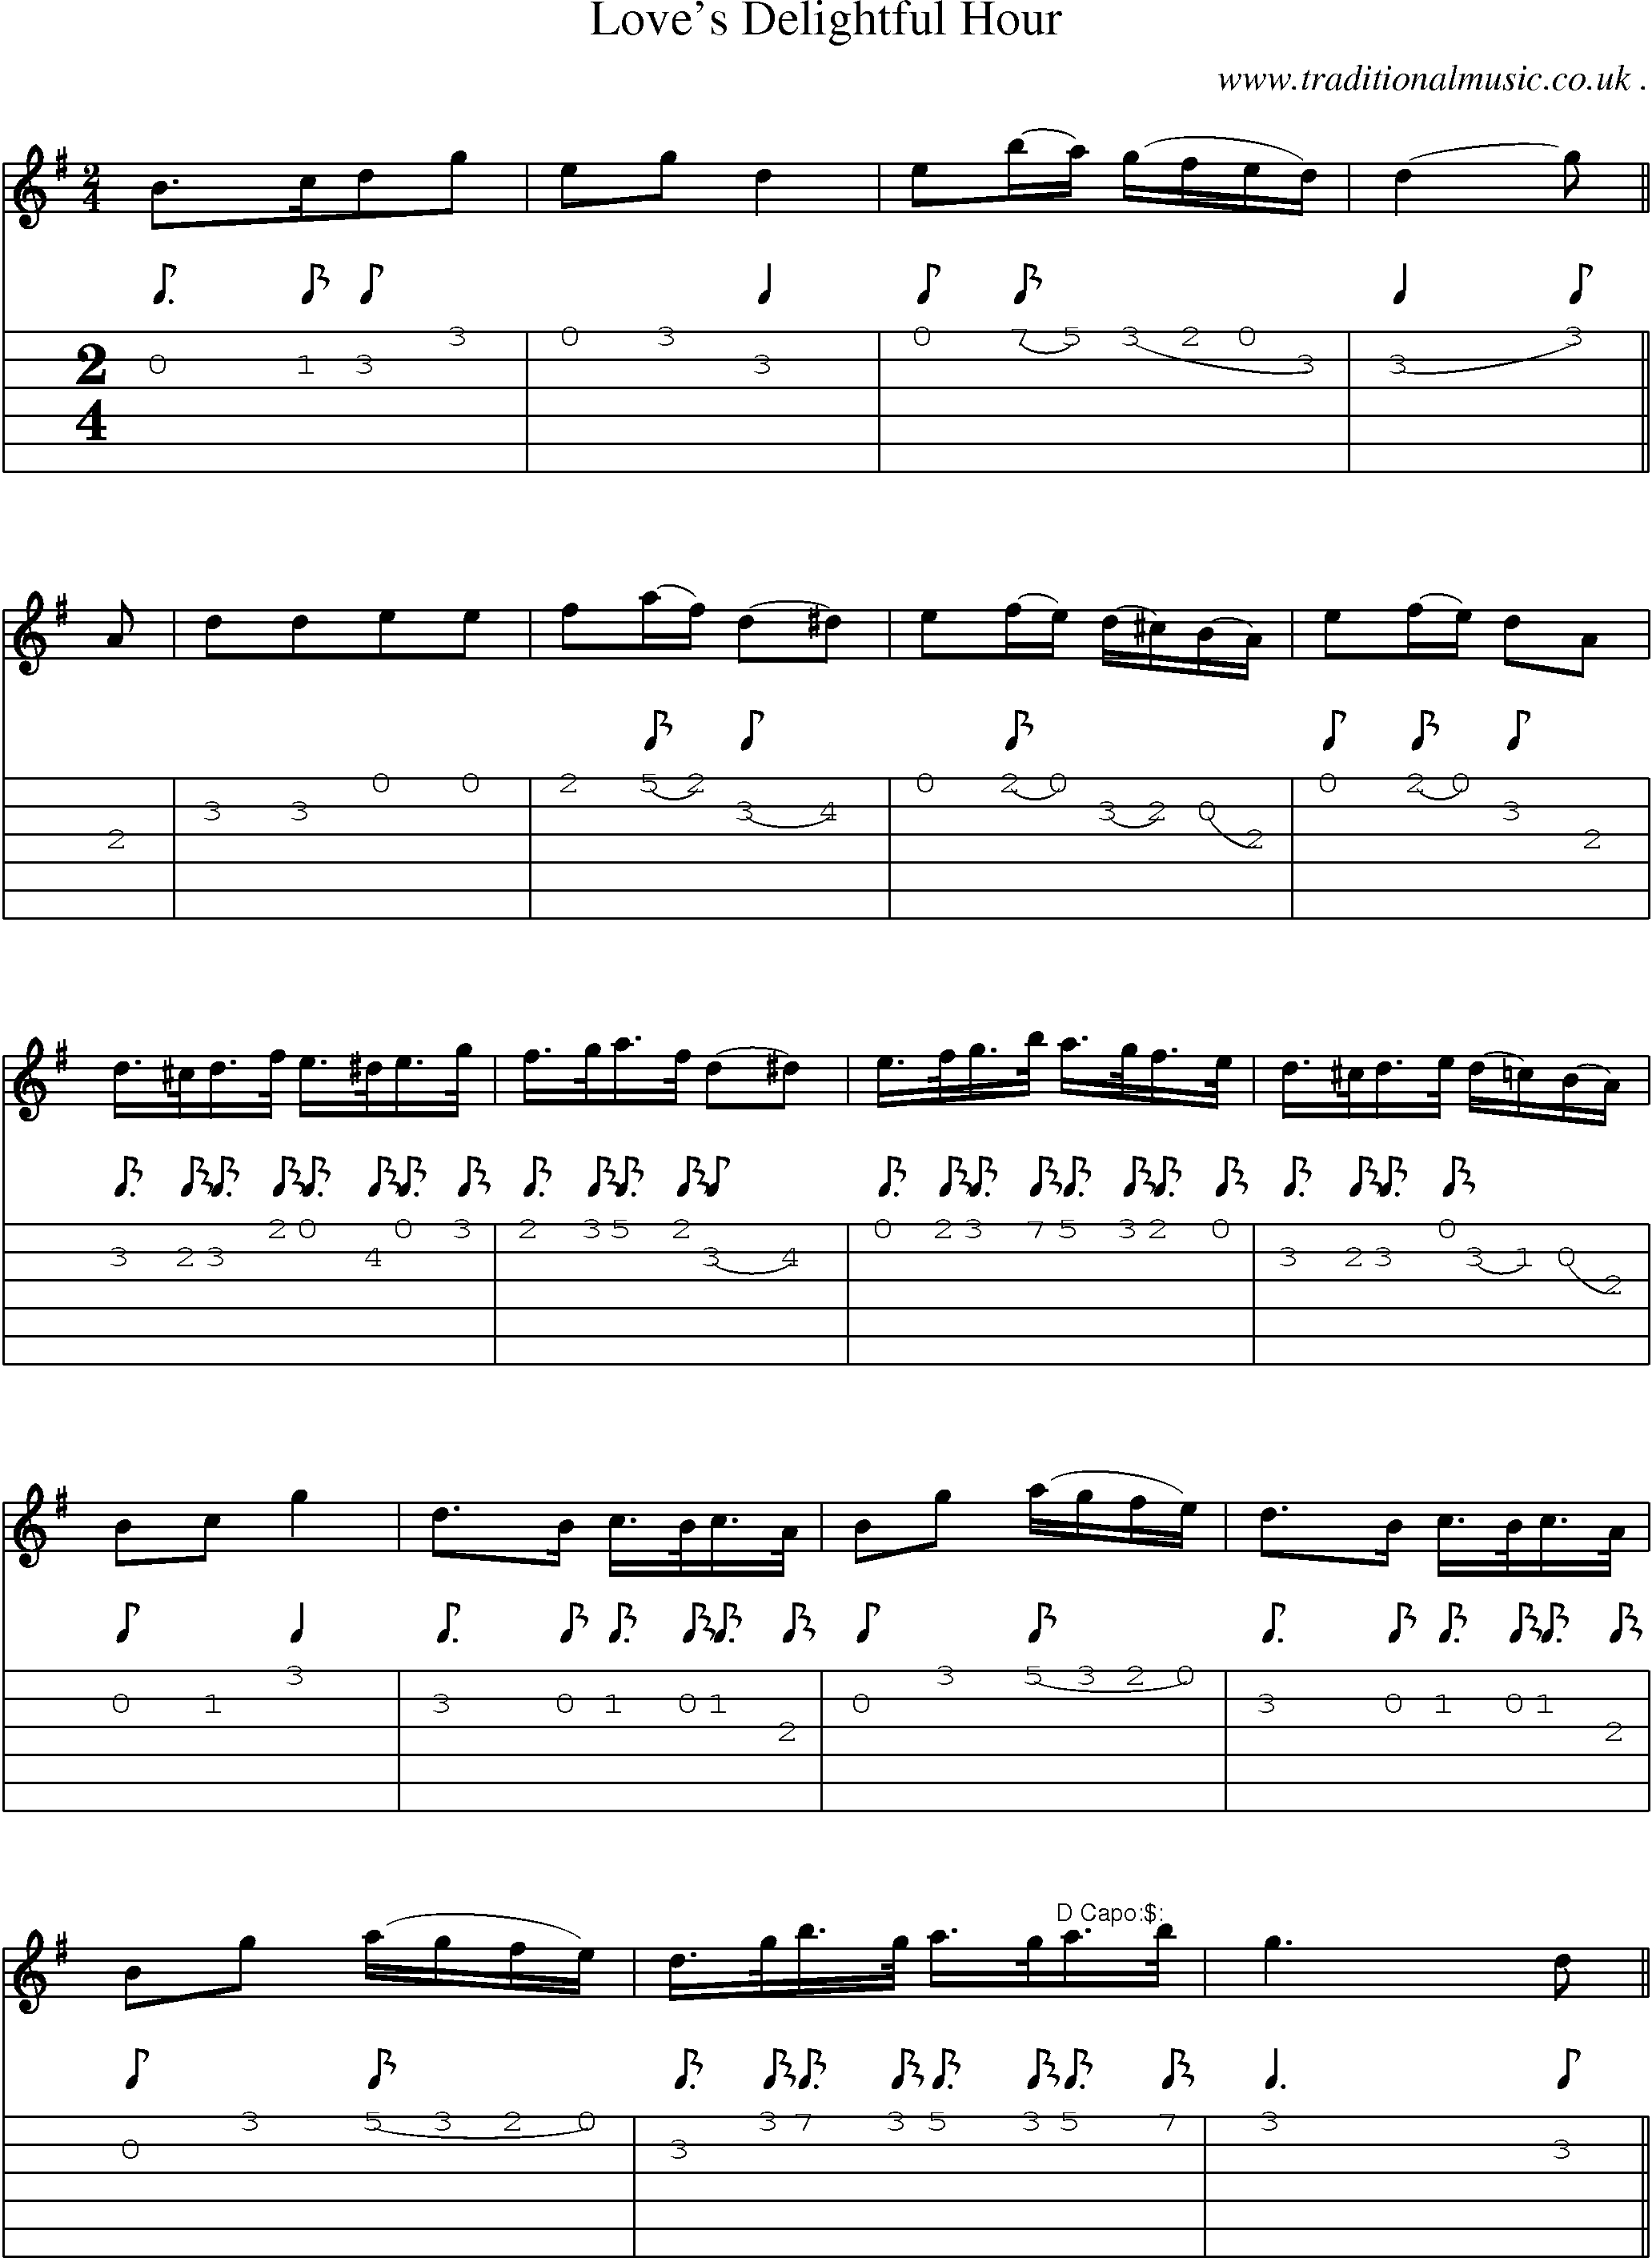 Sheet-Music and Guitar Tabs for Loves Delightful Hour